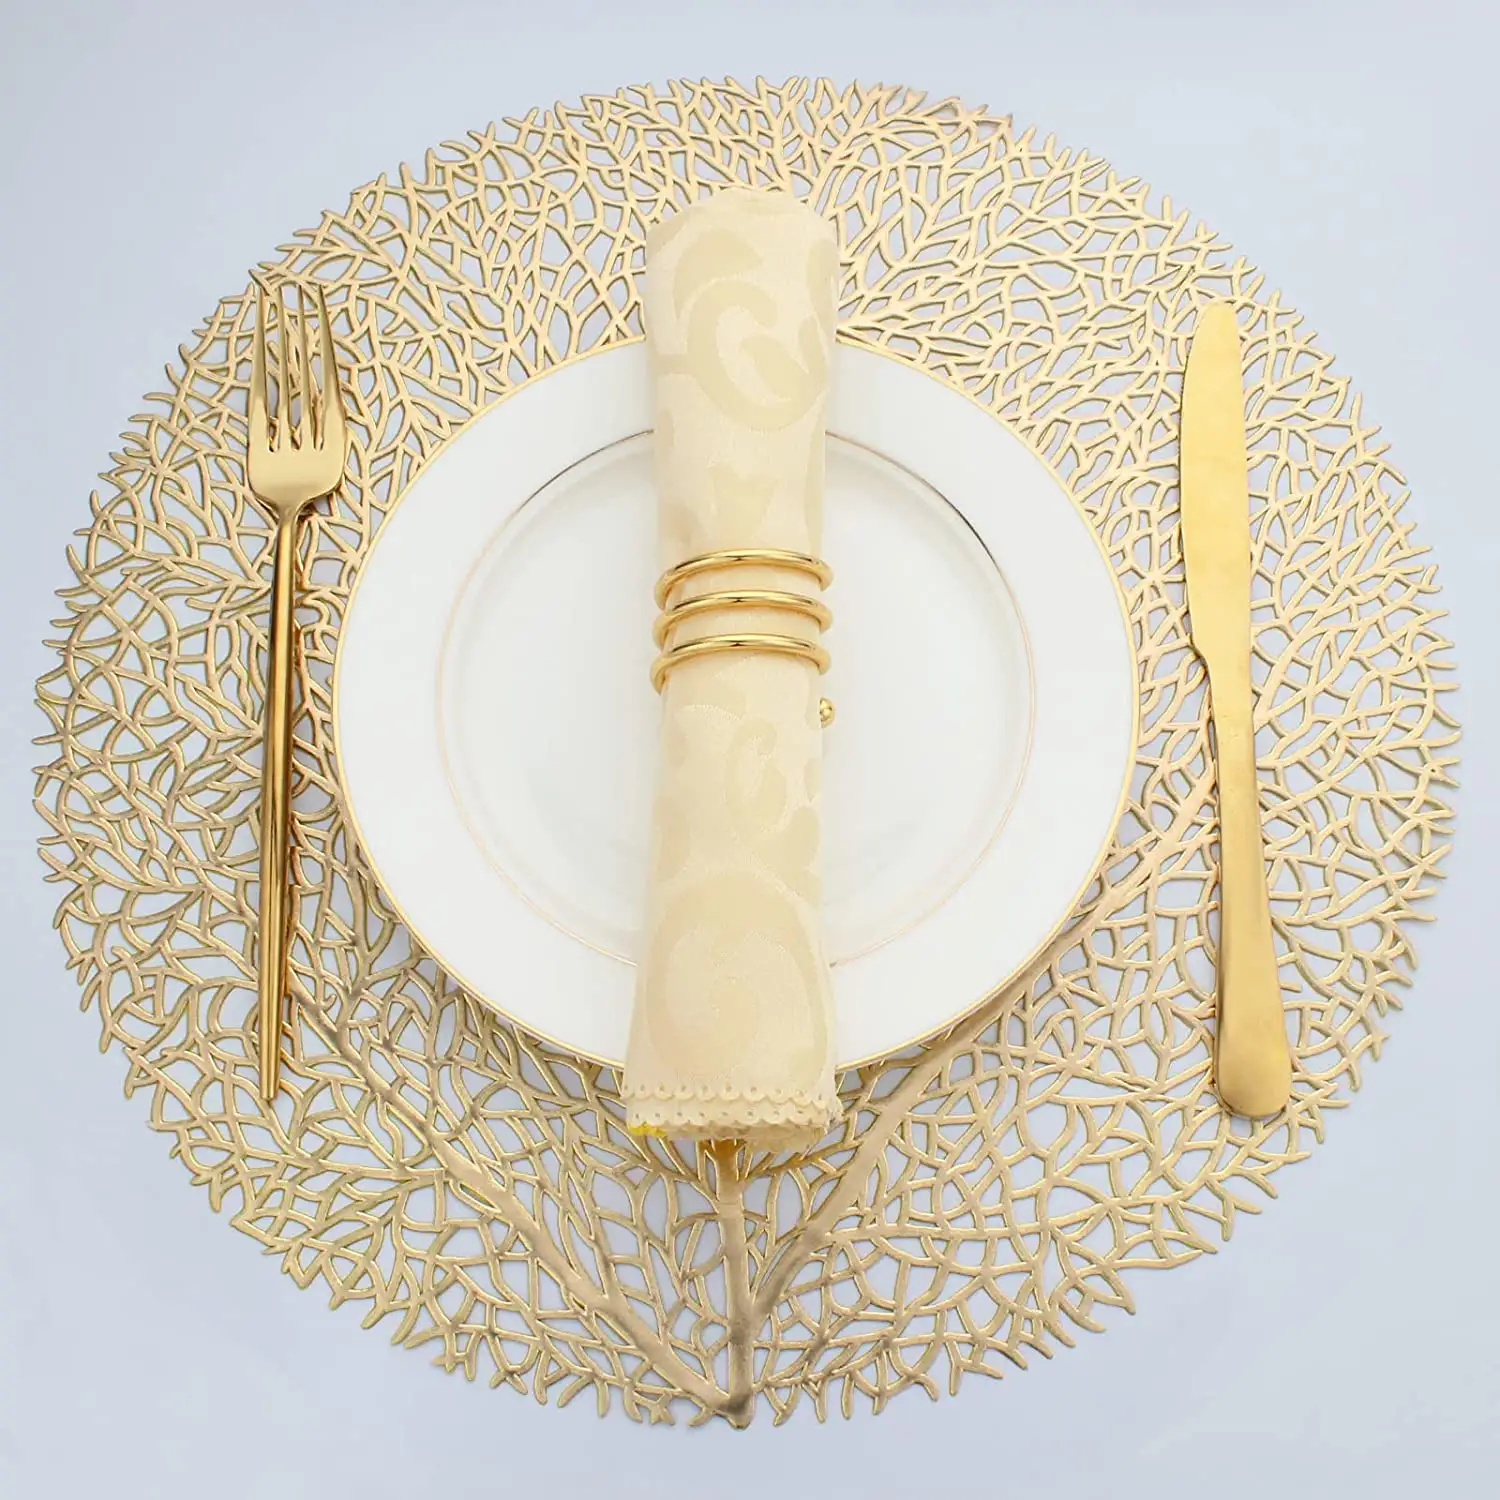 2023 Tabletex hot sale hollow design tree leaf round 38cm PVC placemat gold table mat